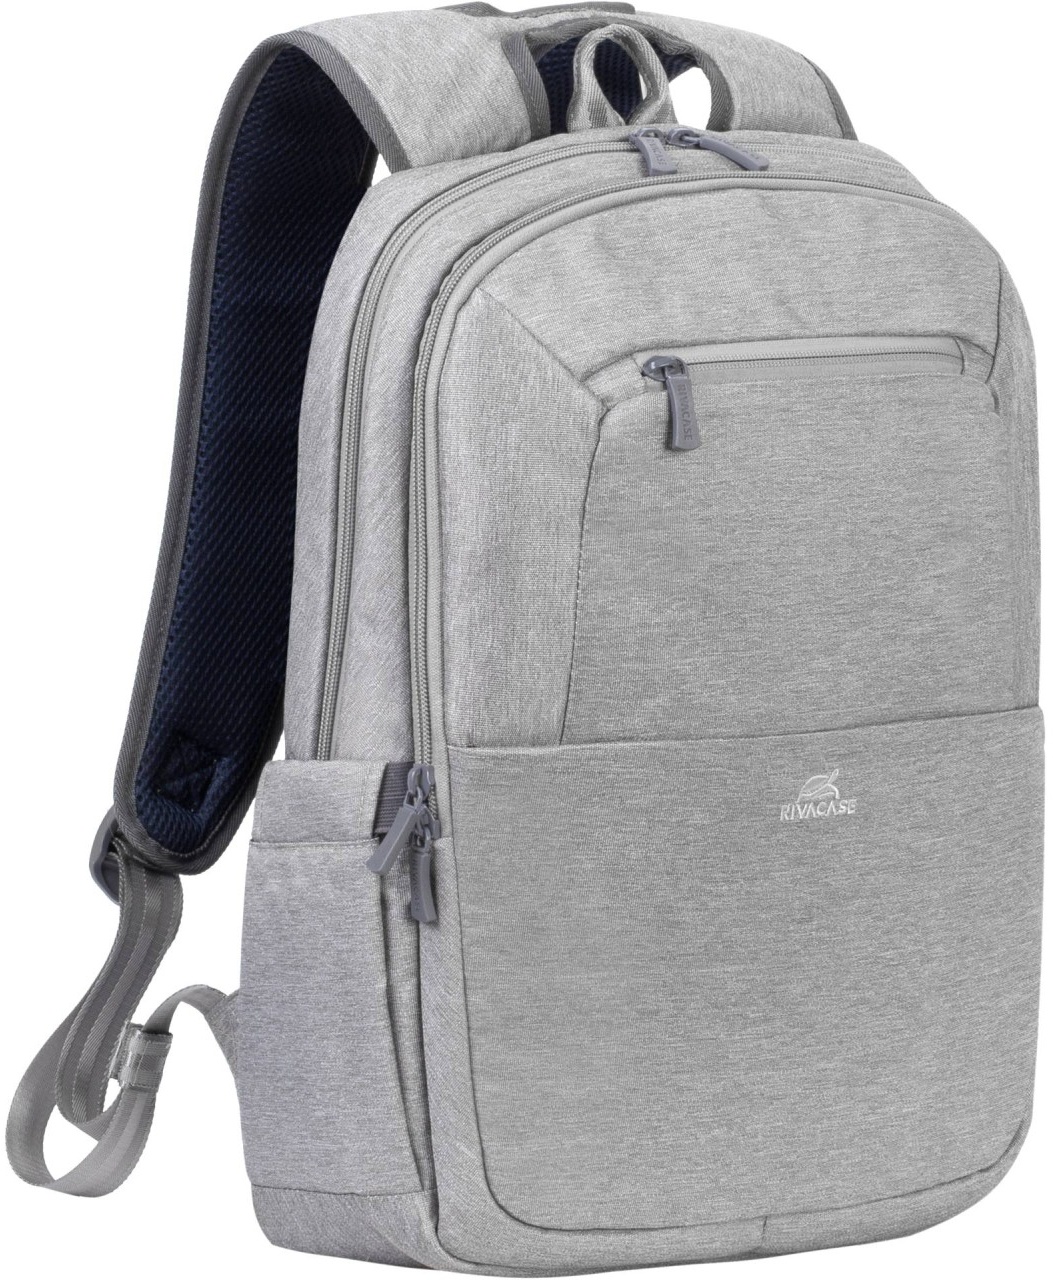 RIVACASE 7760 grey Laptop backpack 156